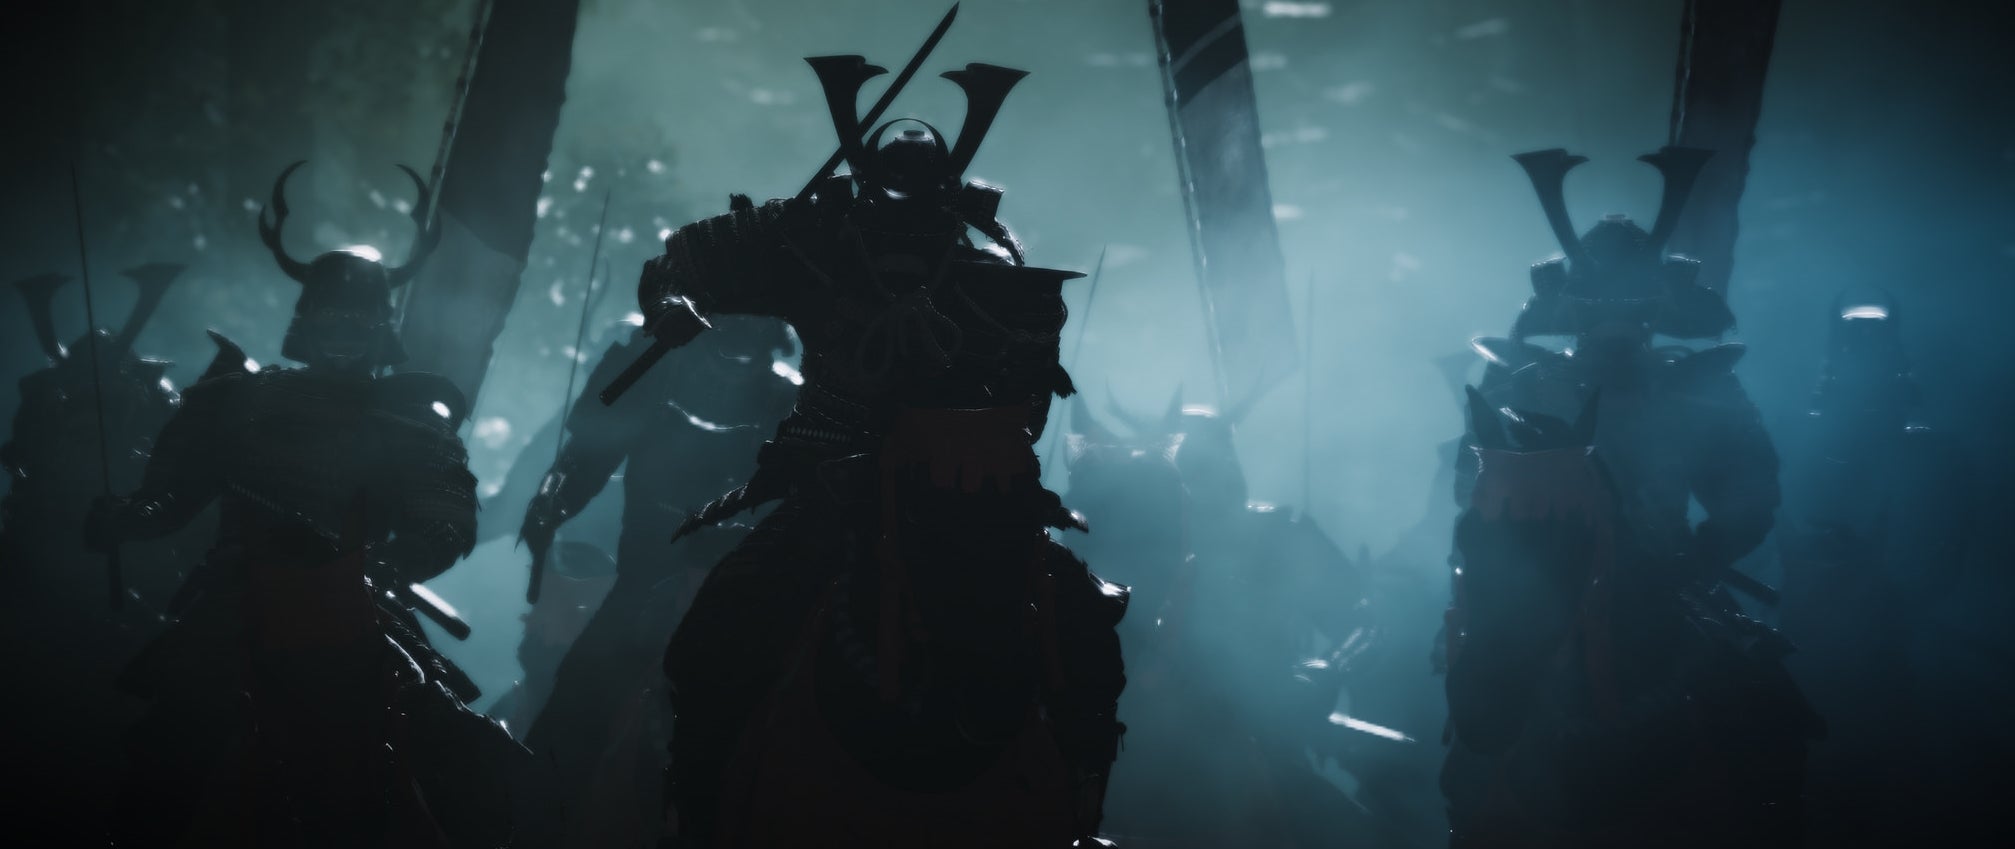 Image for With Ghost of Tsushima, did we get a glimpse of the PS4's glorious swansong?